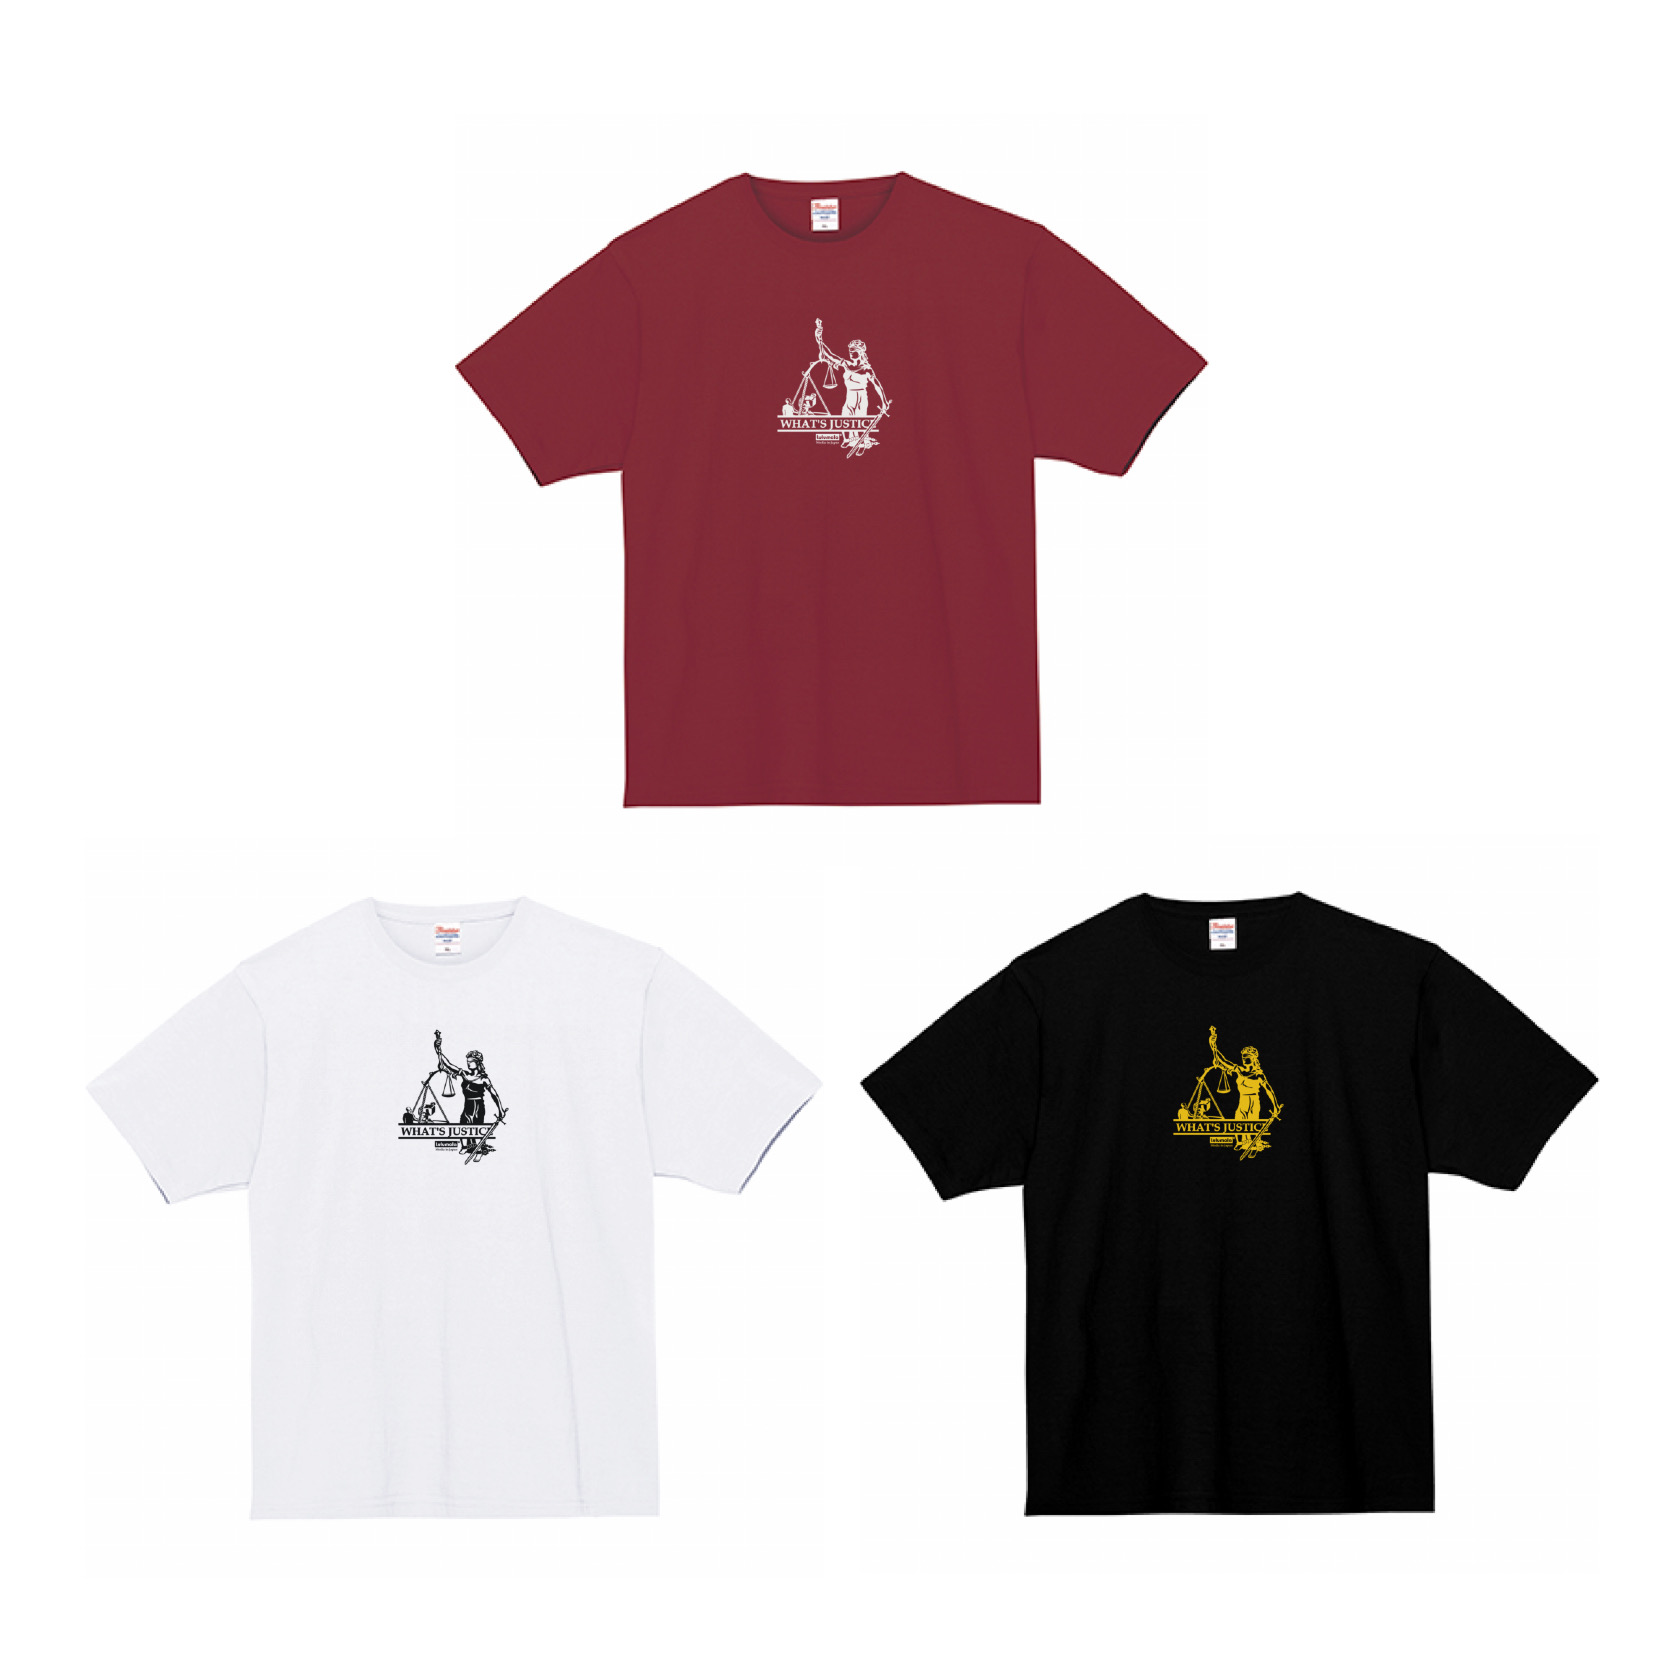 【GOOD GOODS GOOD LIFE】"What's Justice" T-Shirt